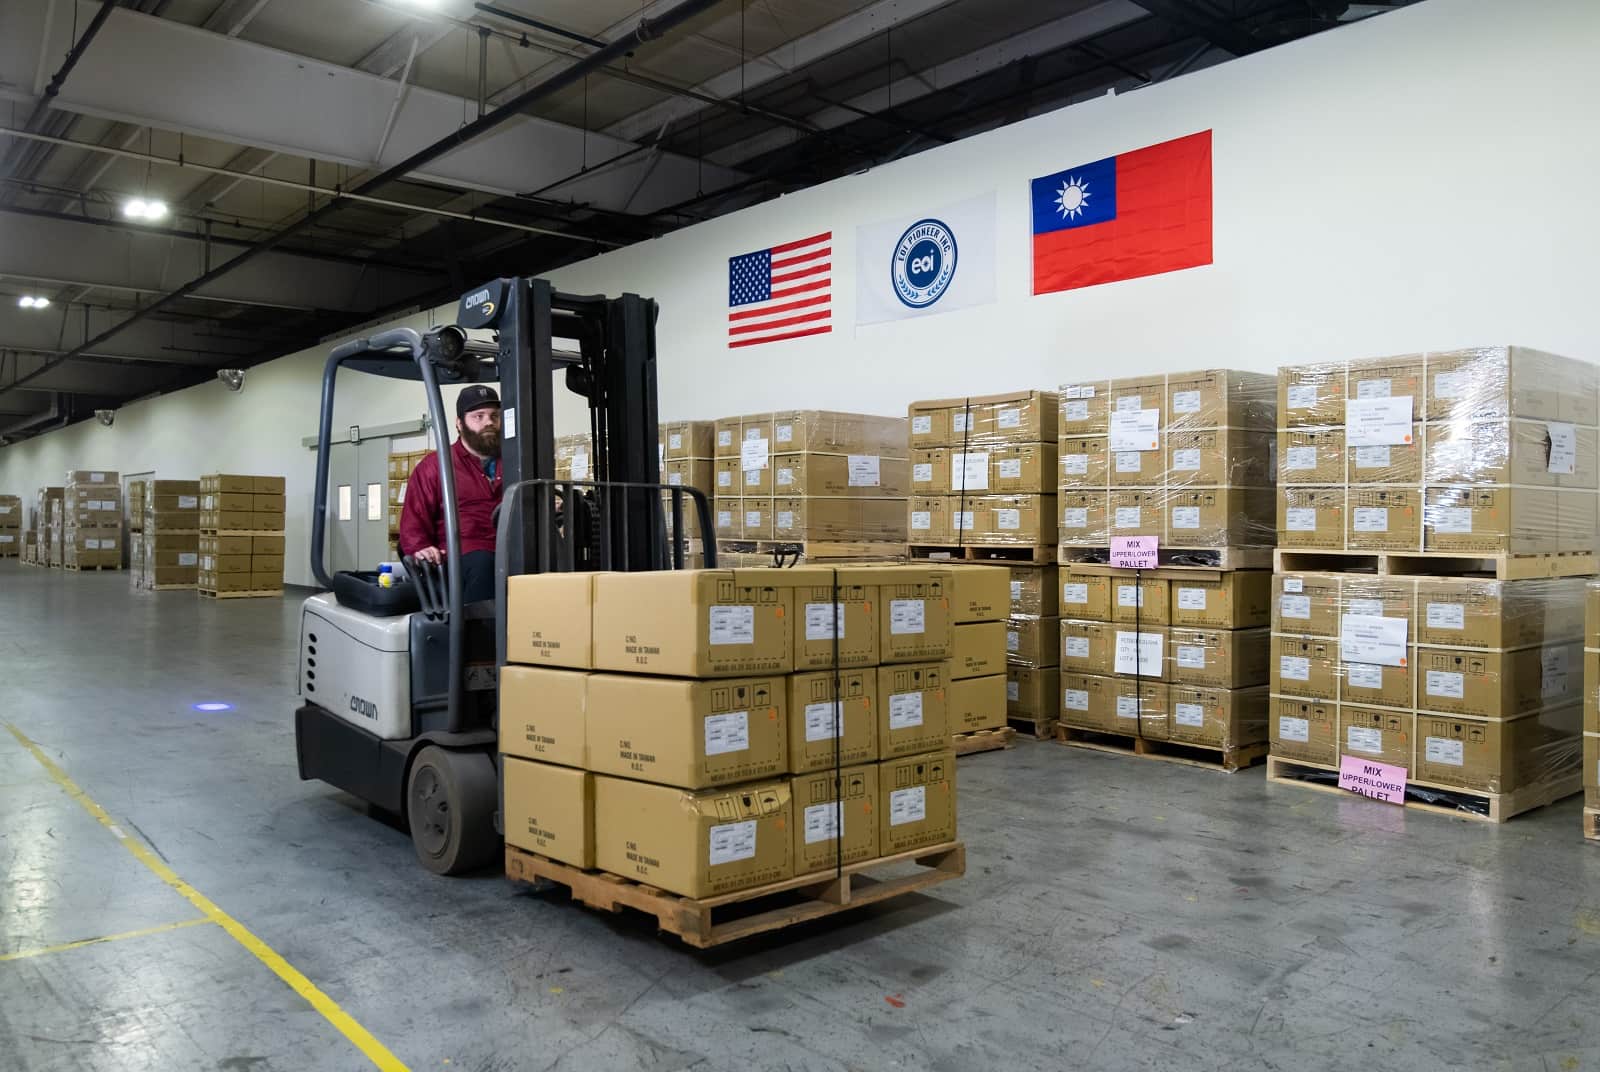 Supply Chain 3.0: the US ambition of Taiwan businesses